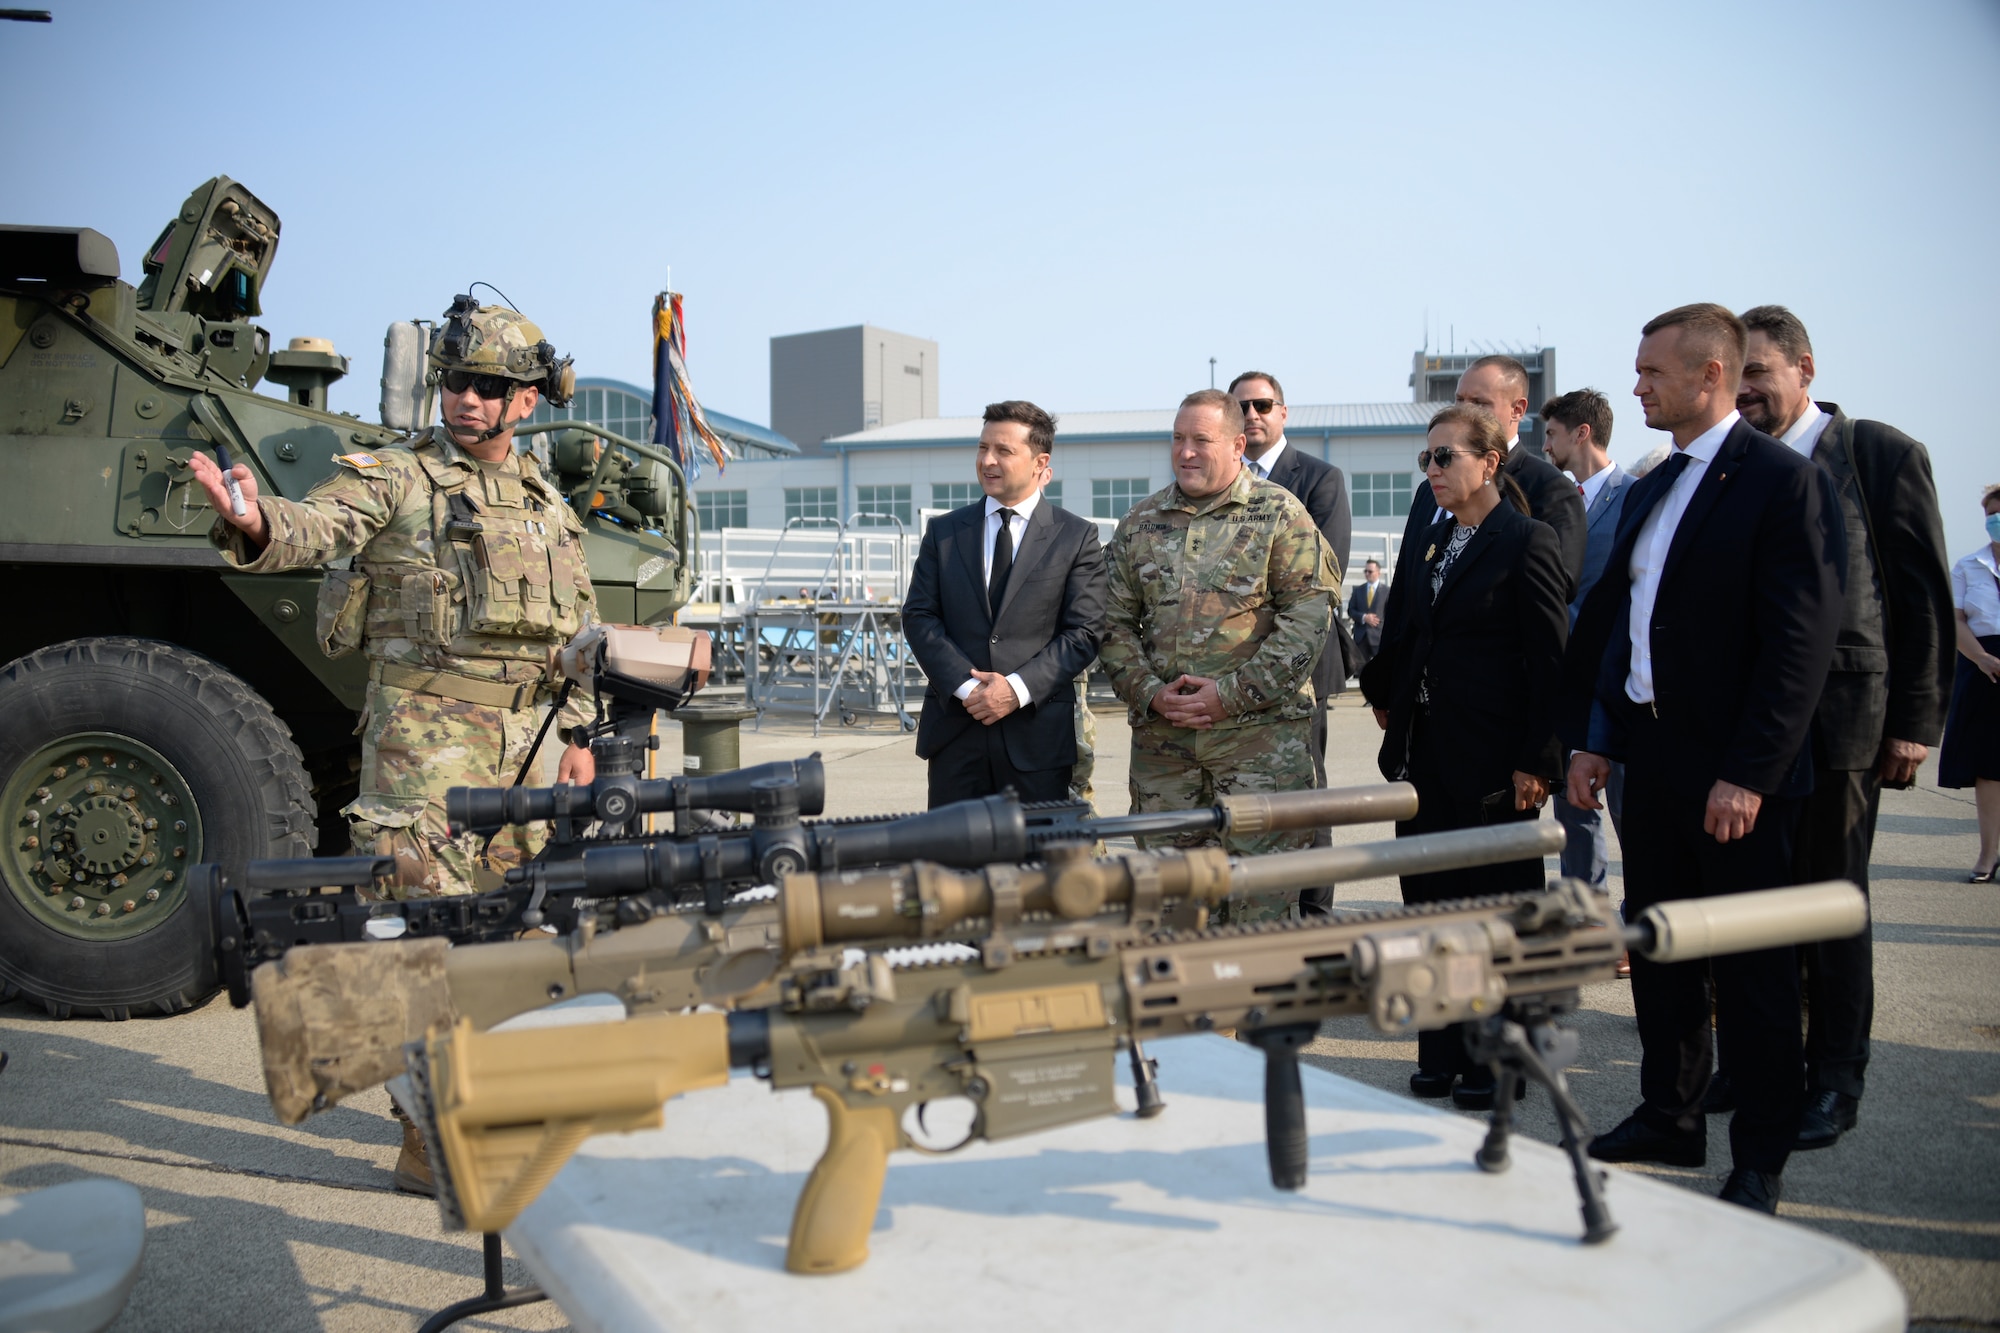 Volodymyr Zelenskyy, president of Ukraine, U.S. Army Maj. Gen. David Baldwin, adjutant general of the California National Guard, and California Lt. Gov. Eleni Kounalakis watch a demonstration of tactical equipment during a visit to the California Air National Guard’s 129th Rescue Wing at Moffett Air National Guard Base, California, Sept. 2, 2021. The California National Guard and Ukraine have been partners under the Department of Defense National Guard Bureau State Partnership Program since 1993.